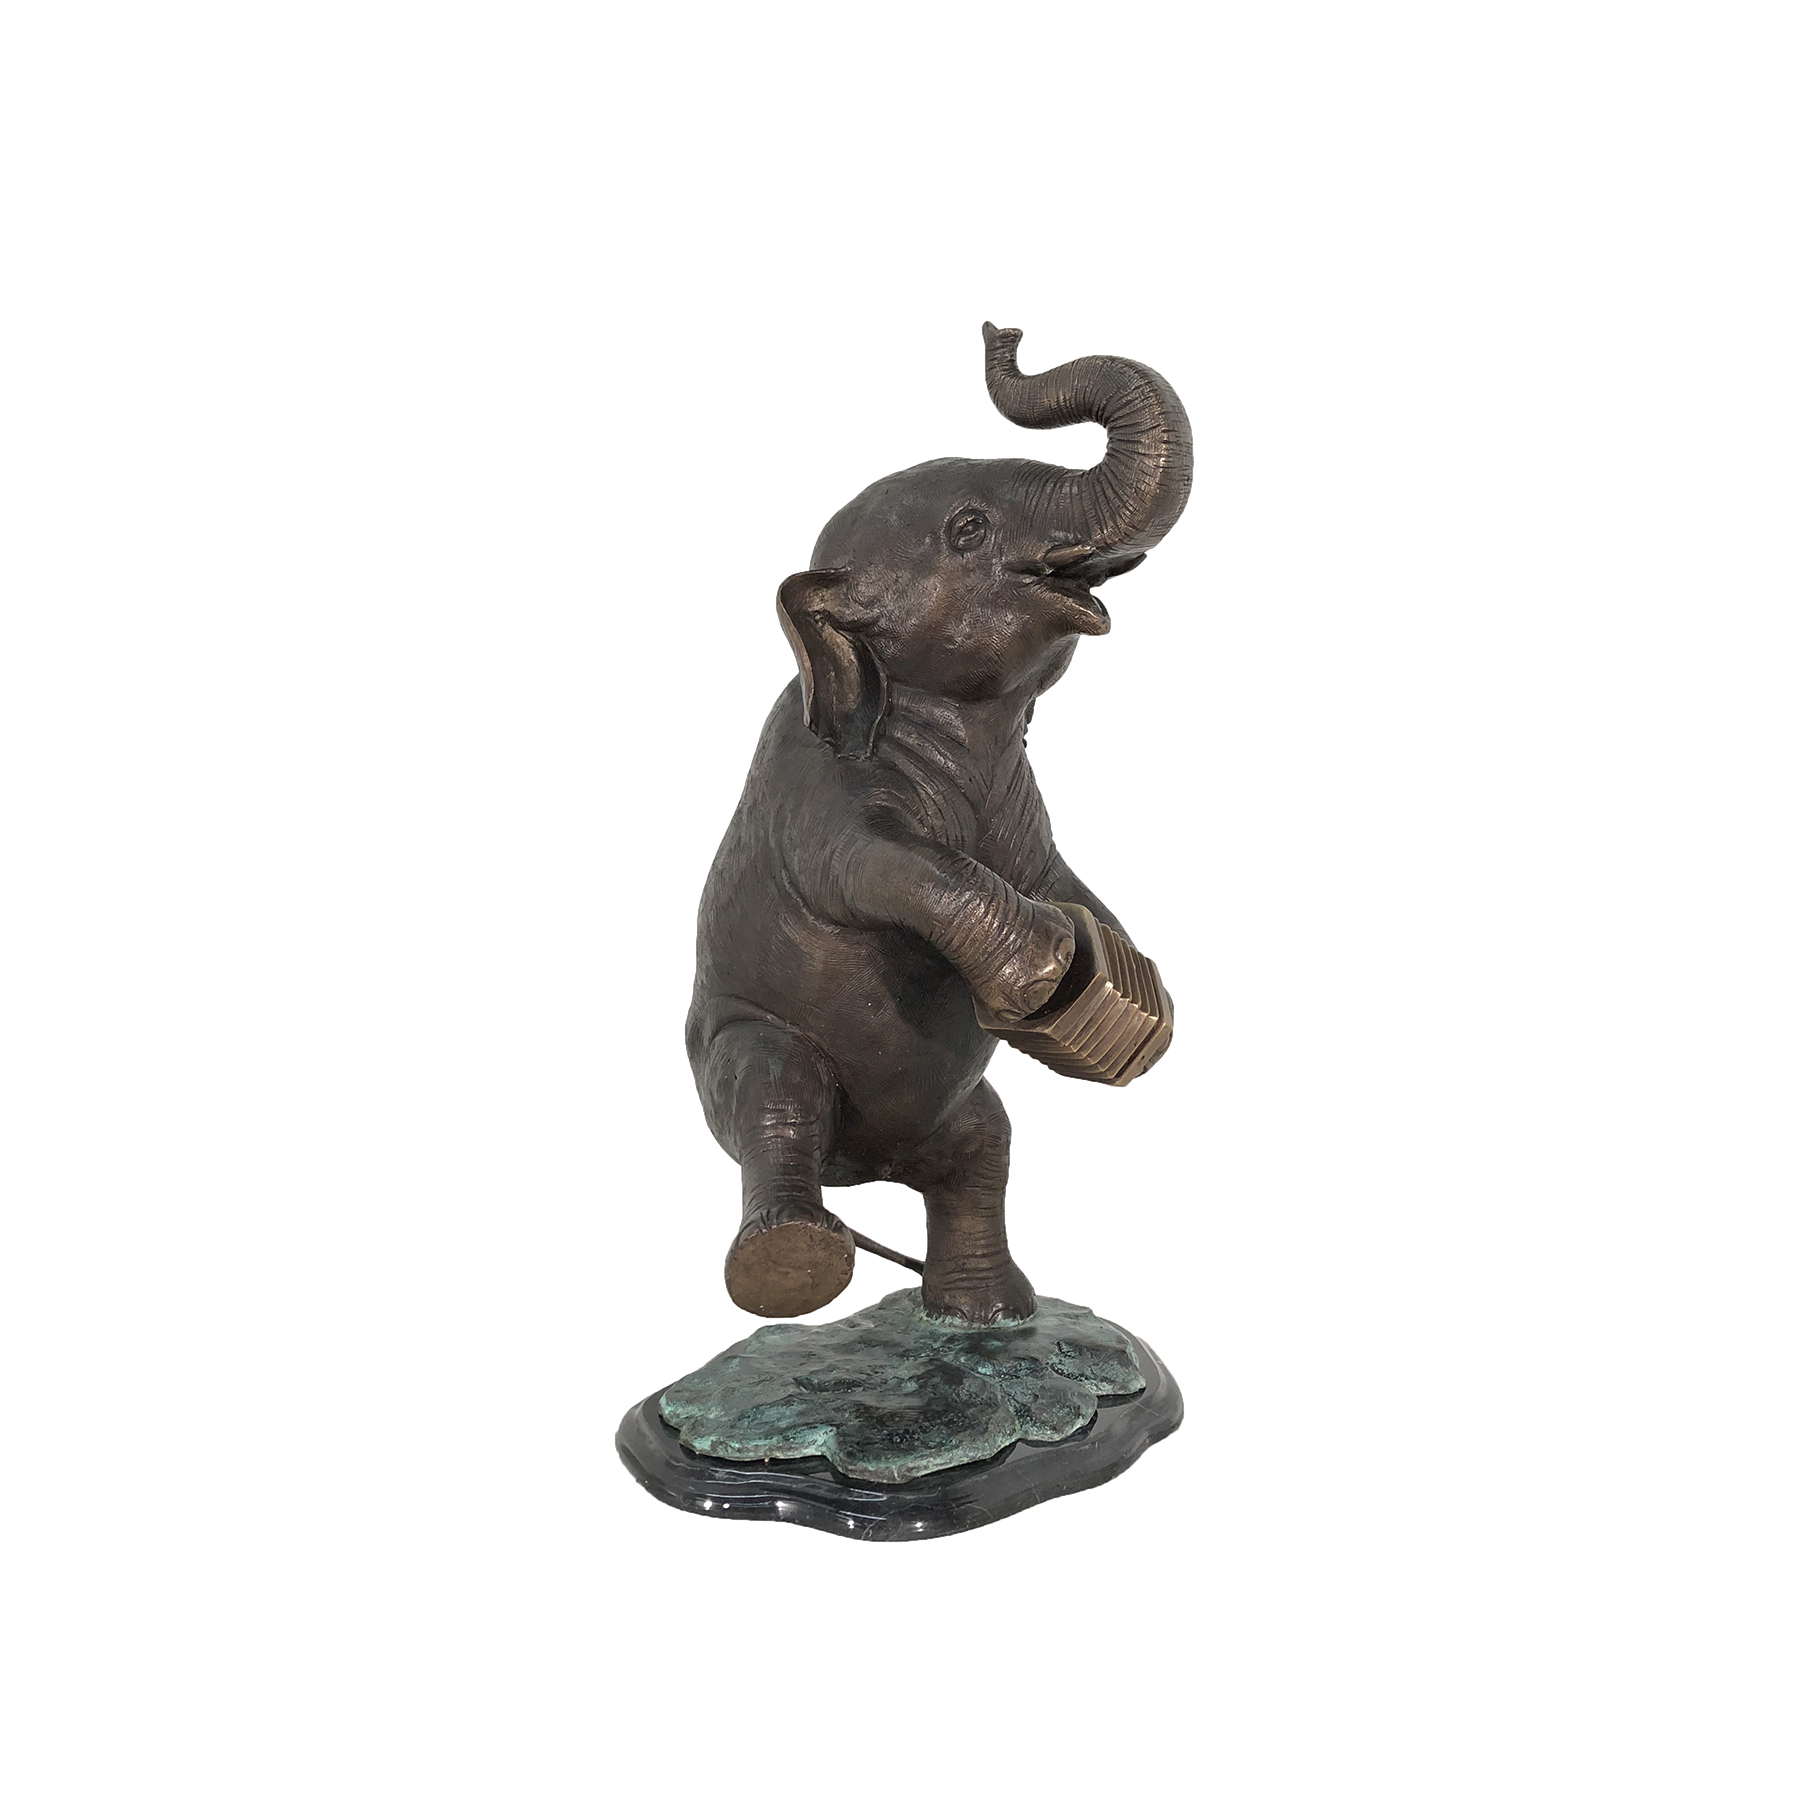 SRB49139 Bronze Elephant playing Accordion Table top Sculpture by Metropolitan Galleries Inc 2